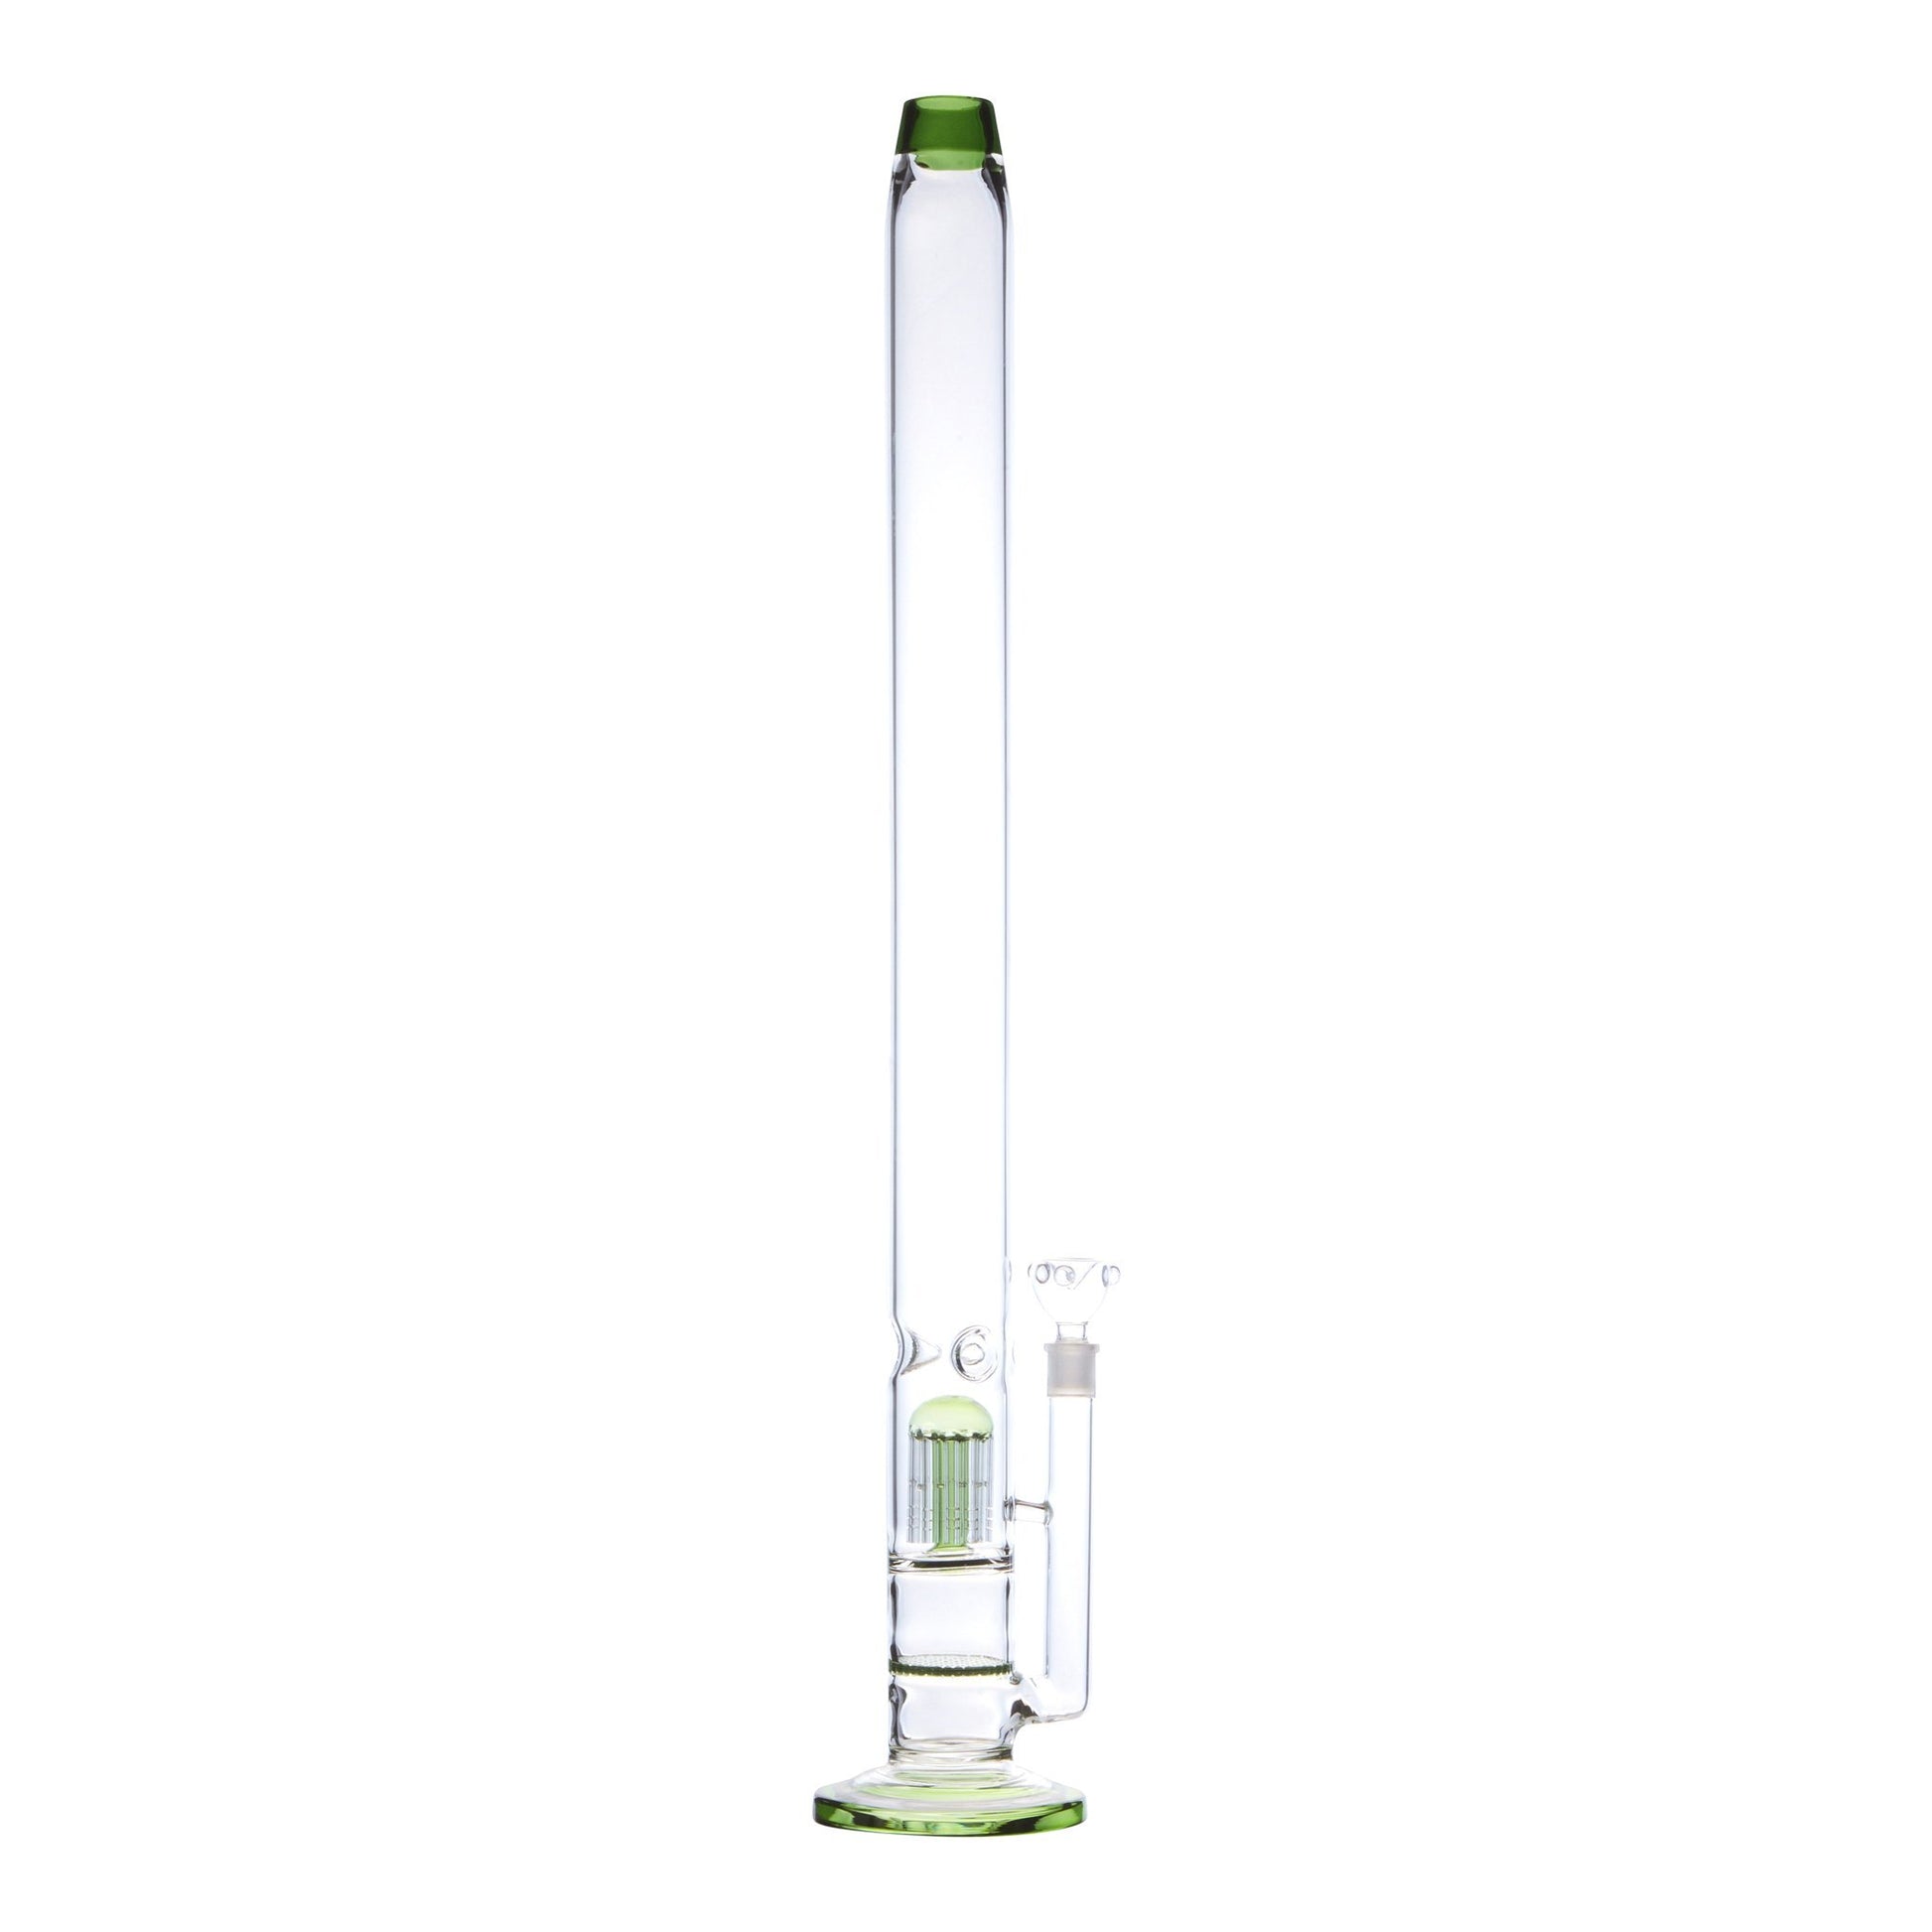 Full shot of 32 inch huge glass straight bong with green accents and bowl on right